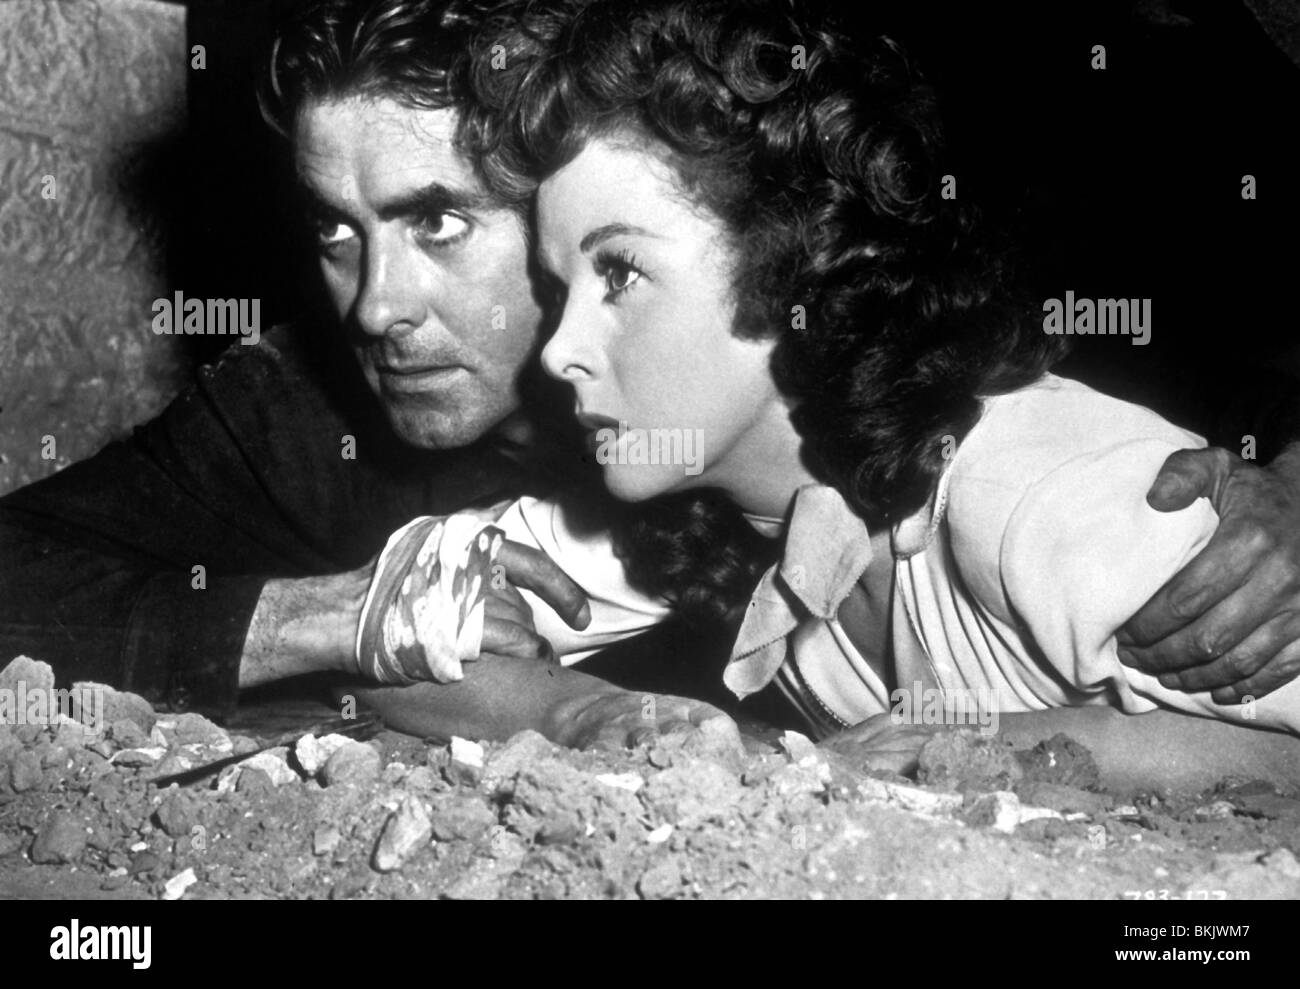 RAWHIDE (1950) Tyrone Power, SUSAN HAYWARD RWHD 005 Banque D'Images